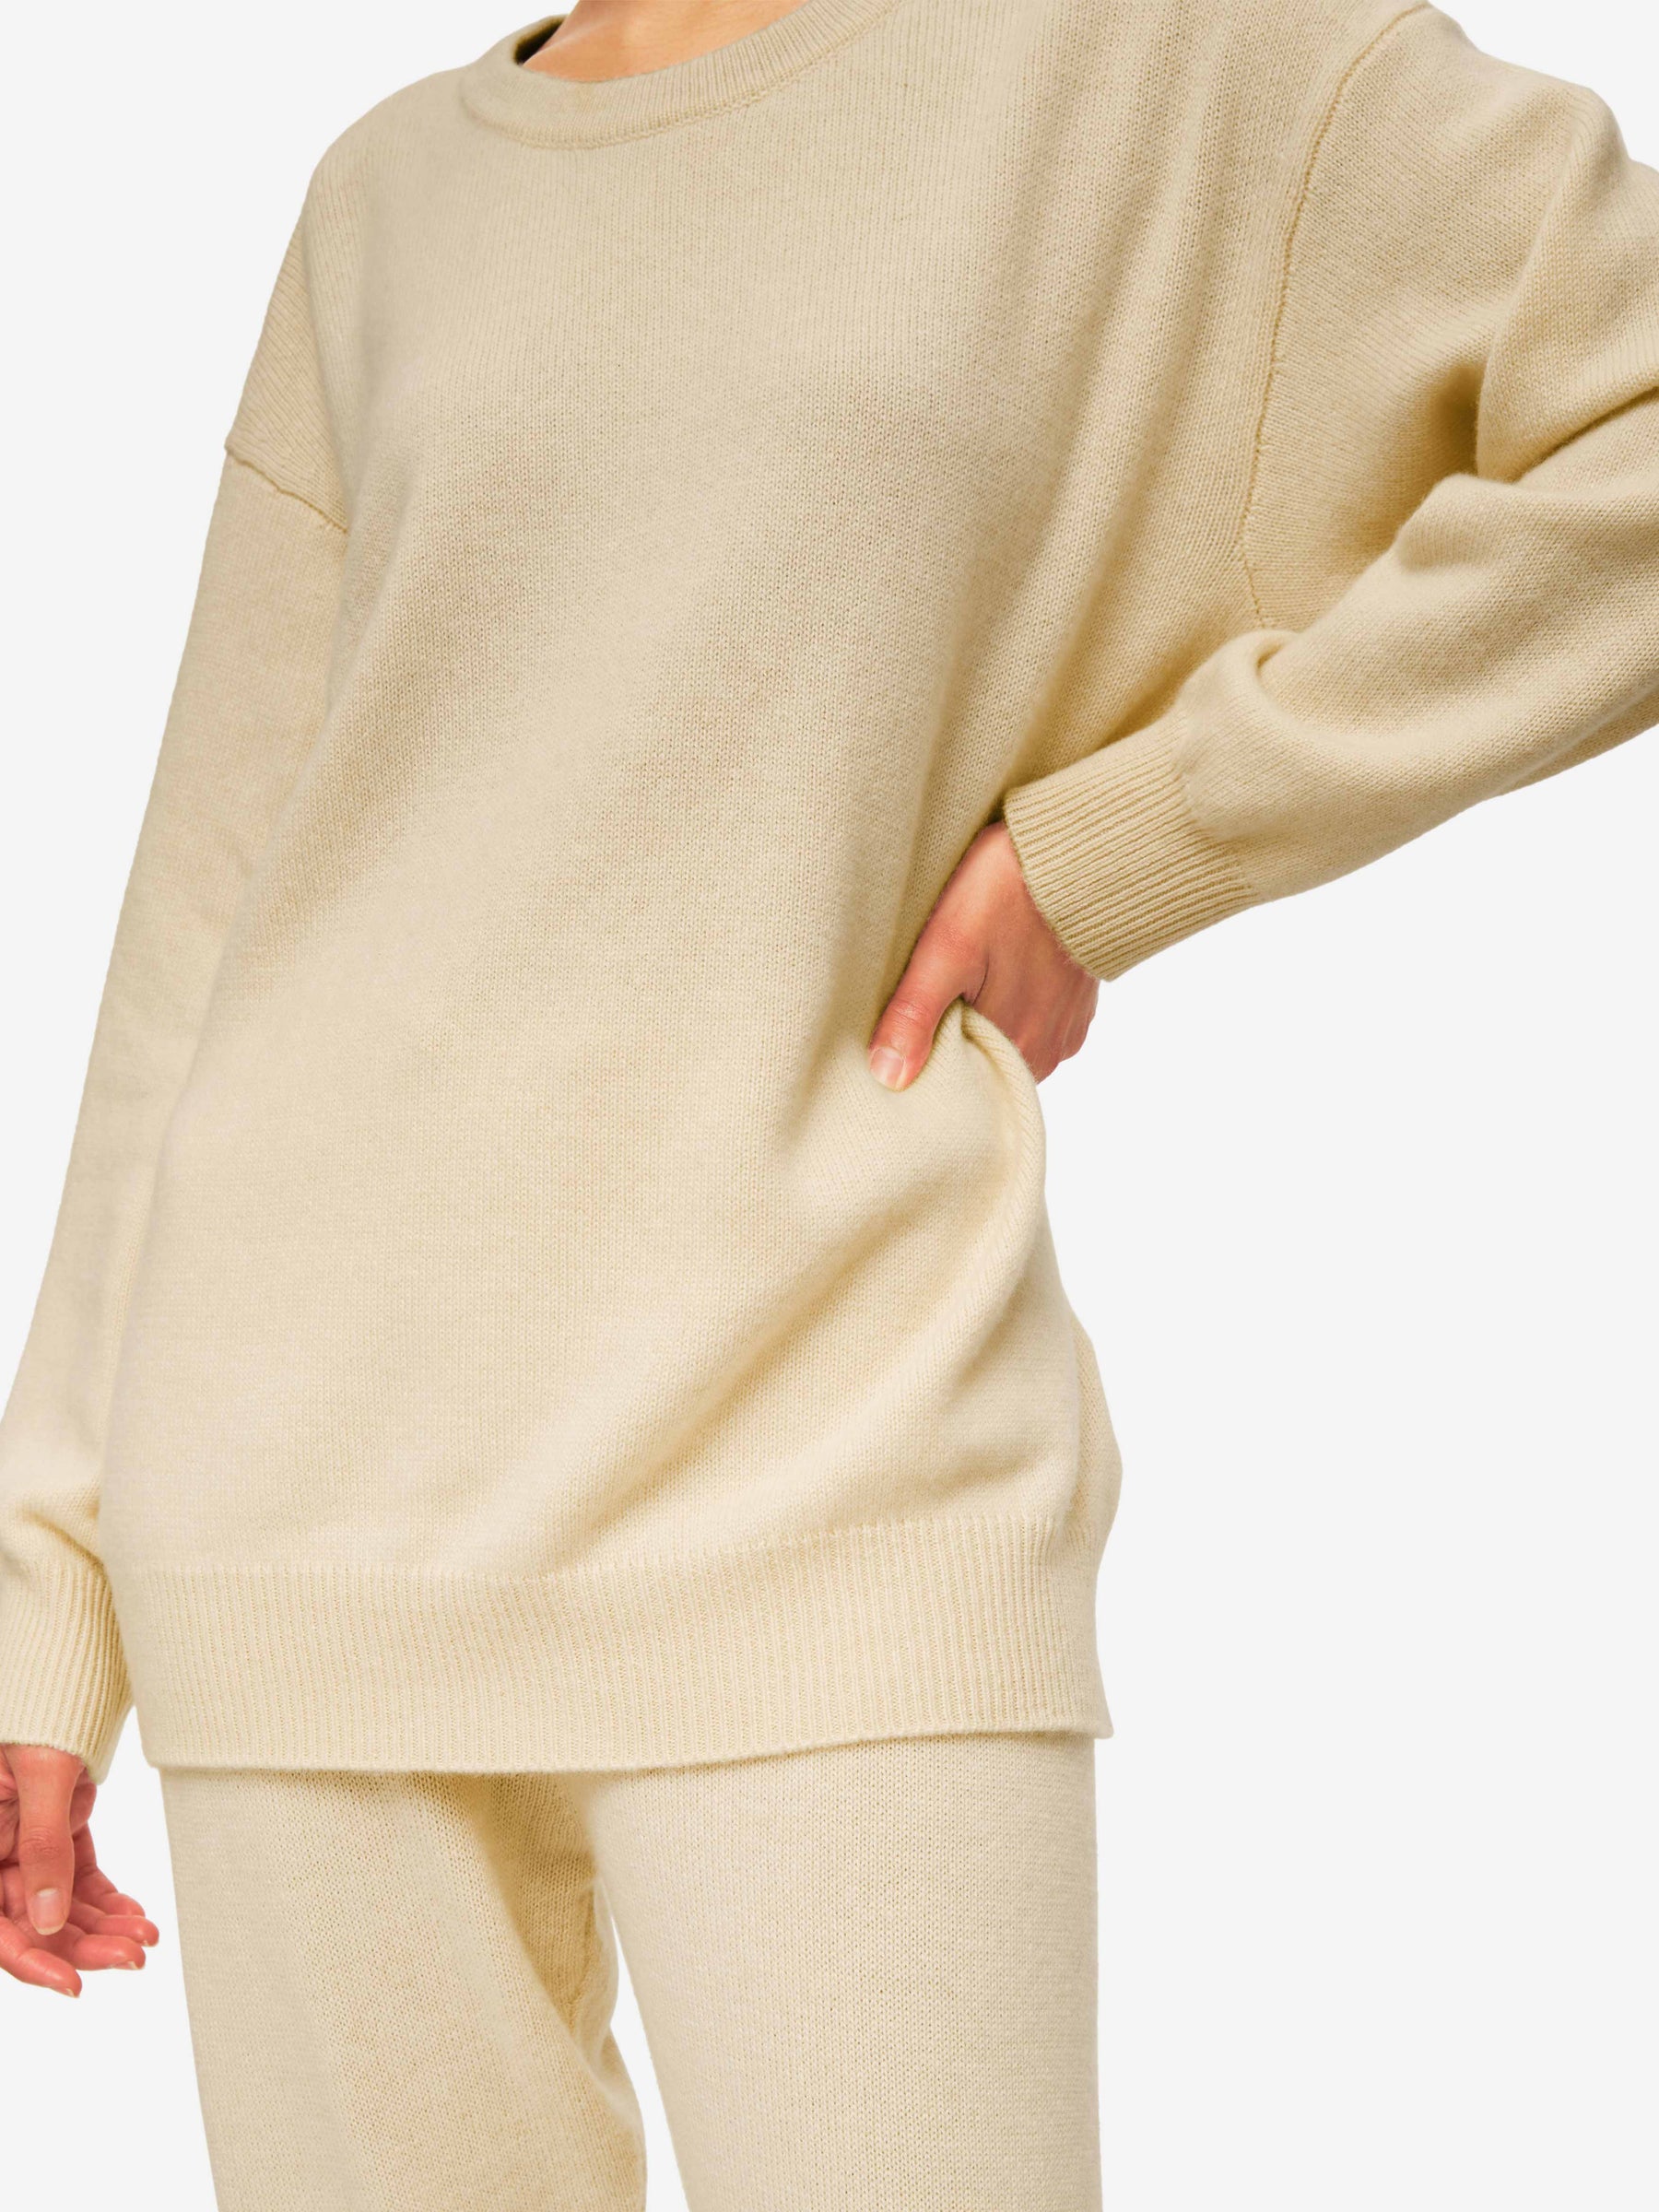 Women's Relaxed Sweater Daphne Cashmere Beige